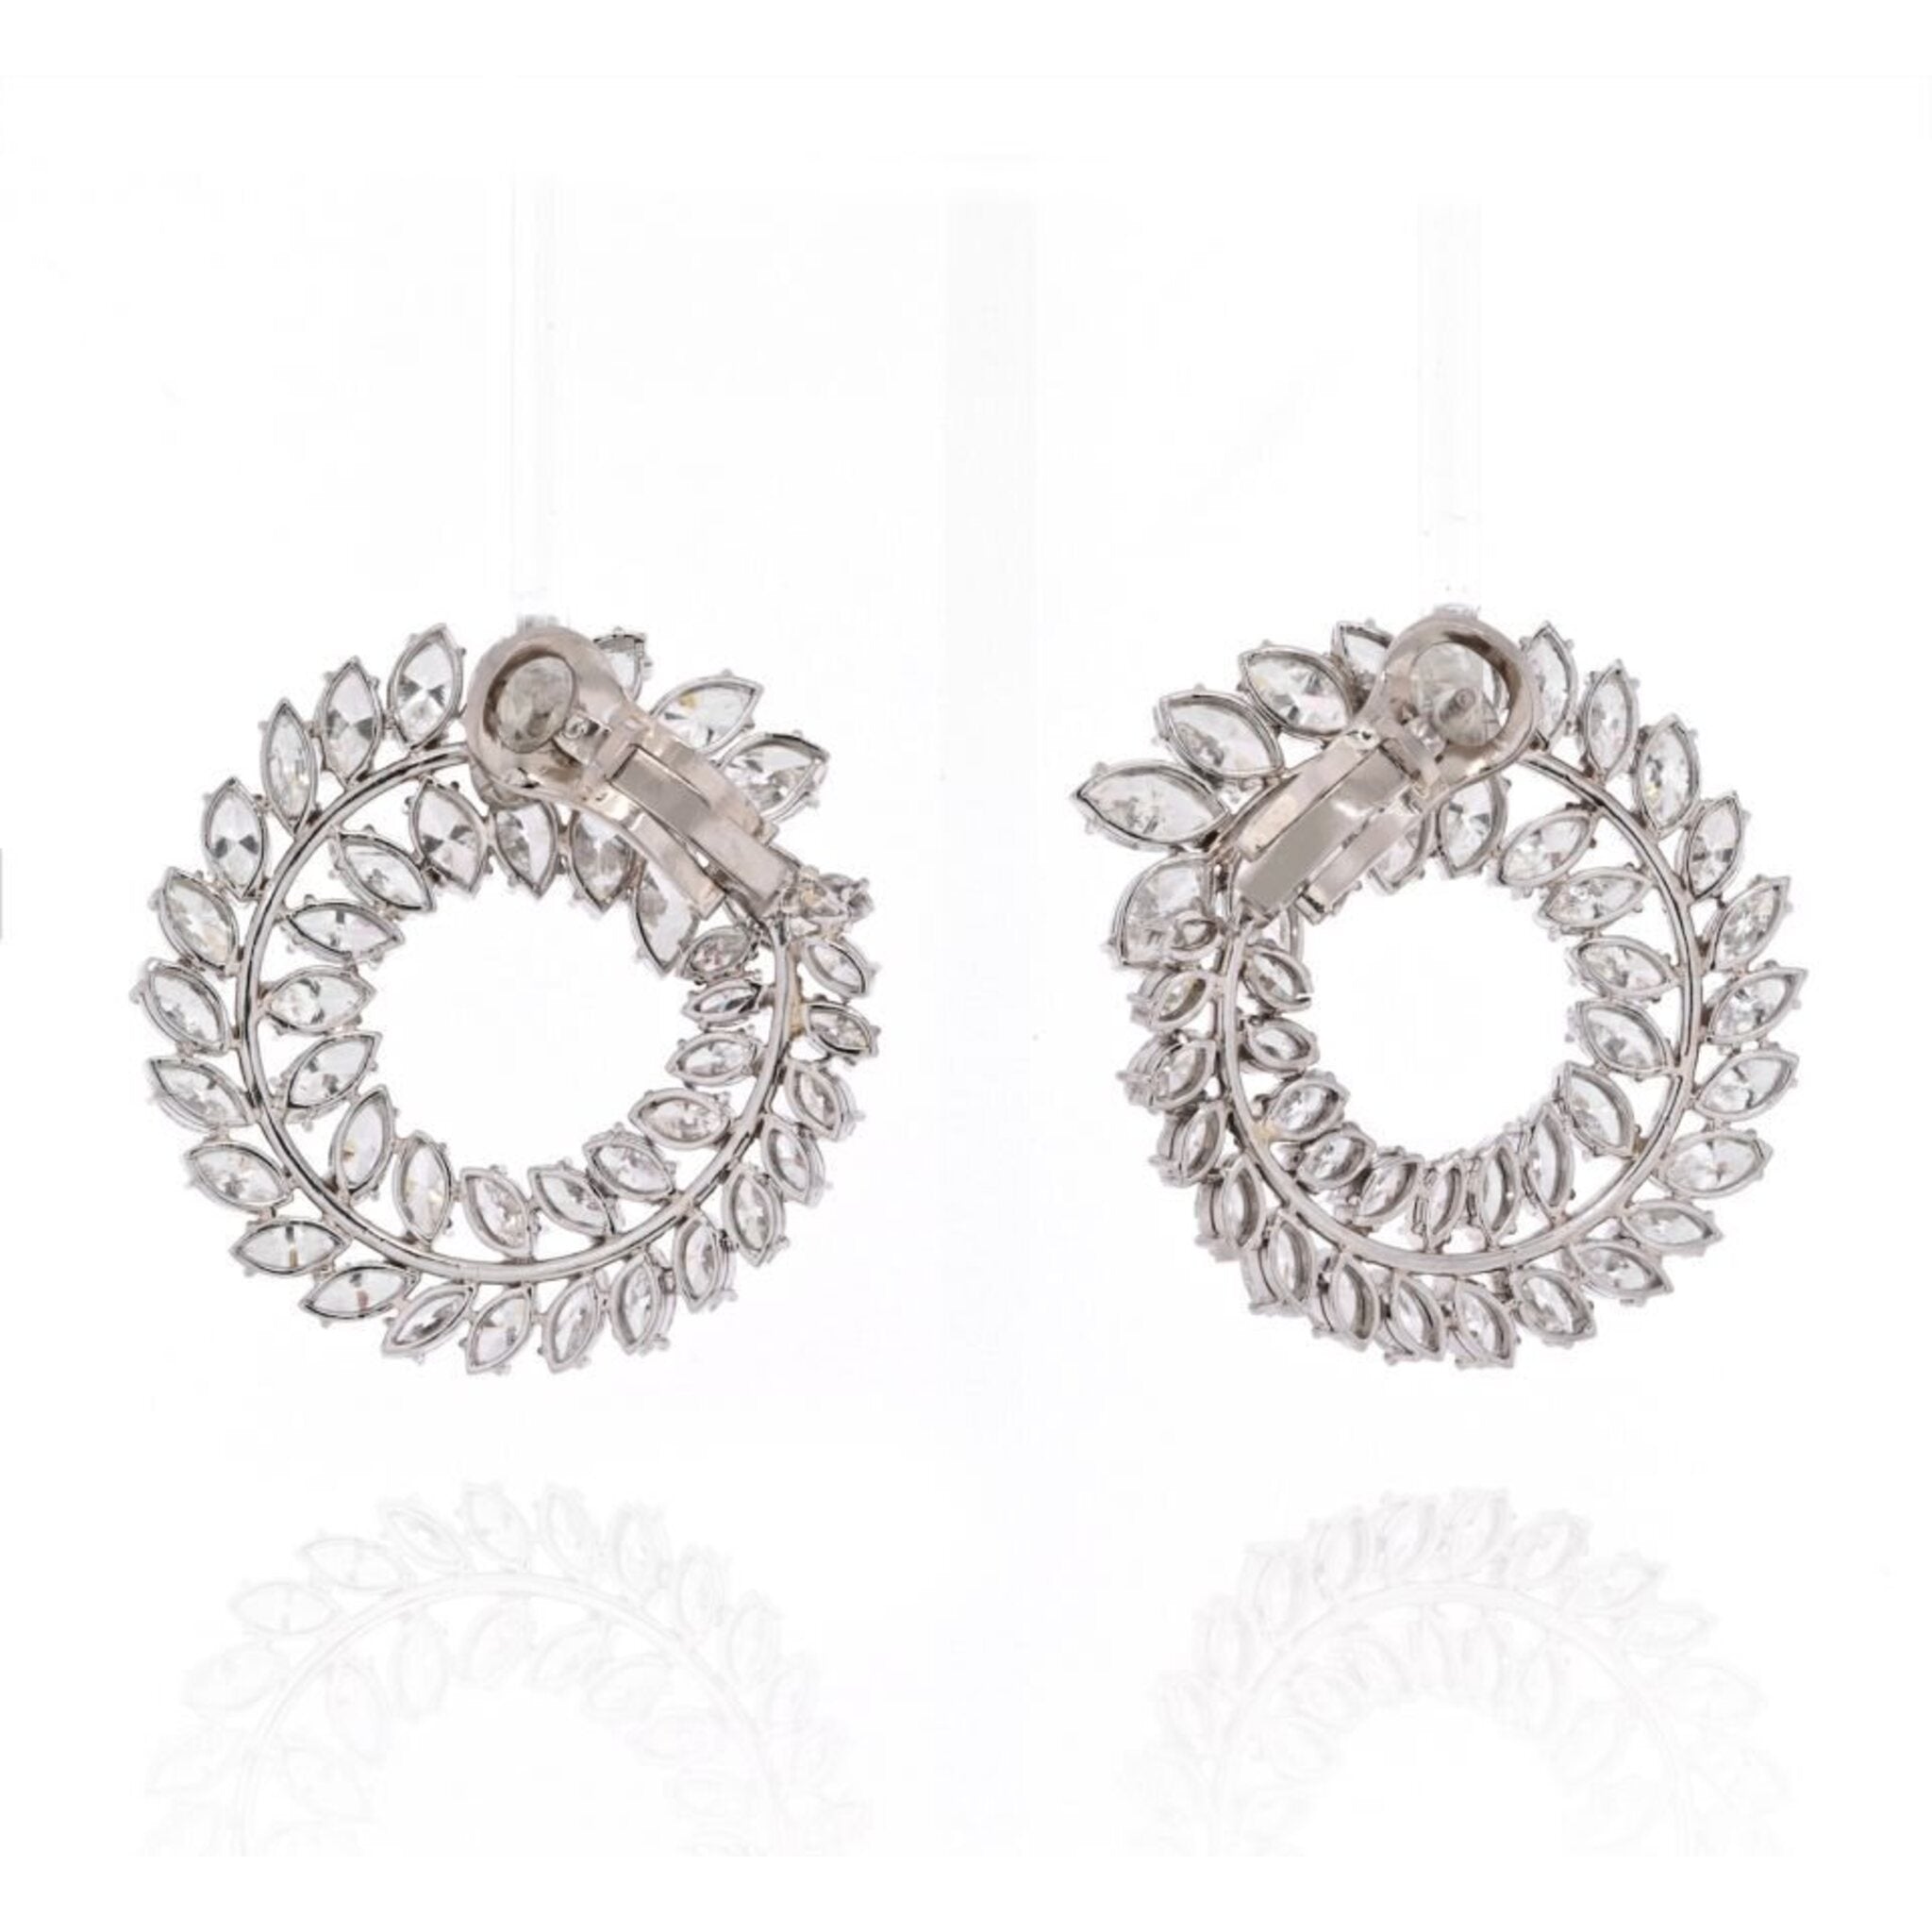 Exclusive cz earrings in platinum finish -